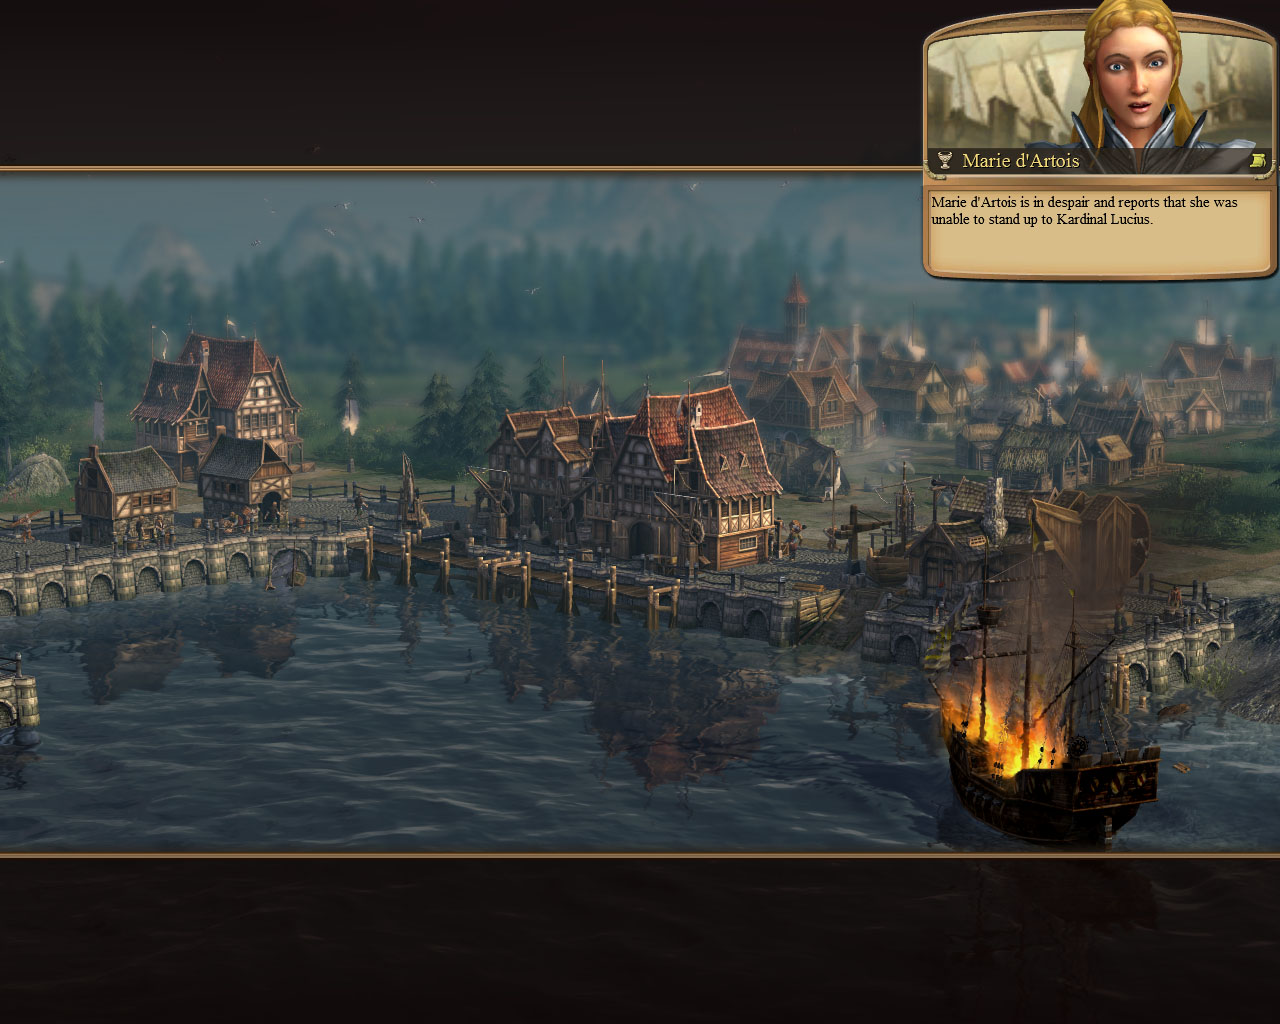 anno 1404 venice unabler to sink ships